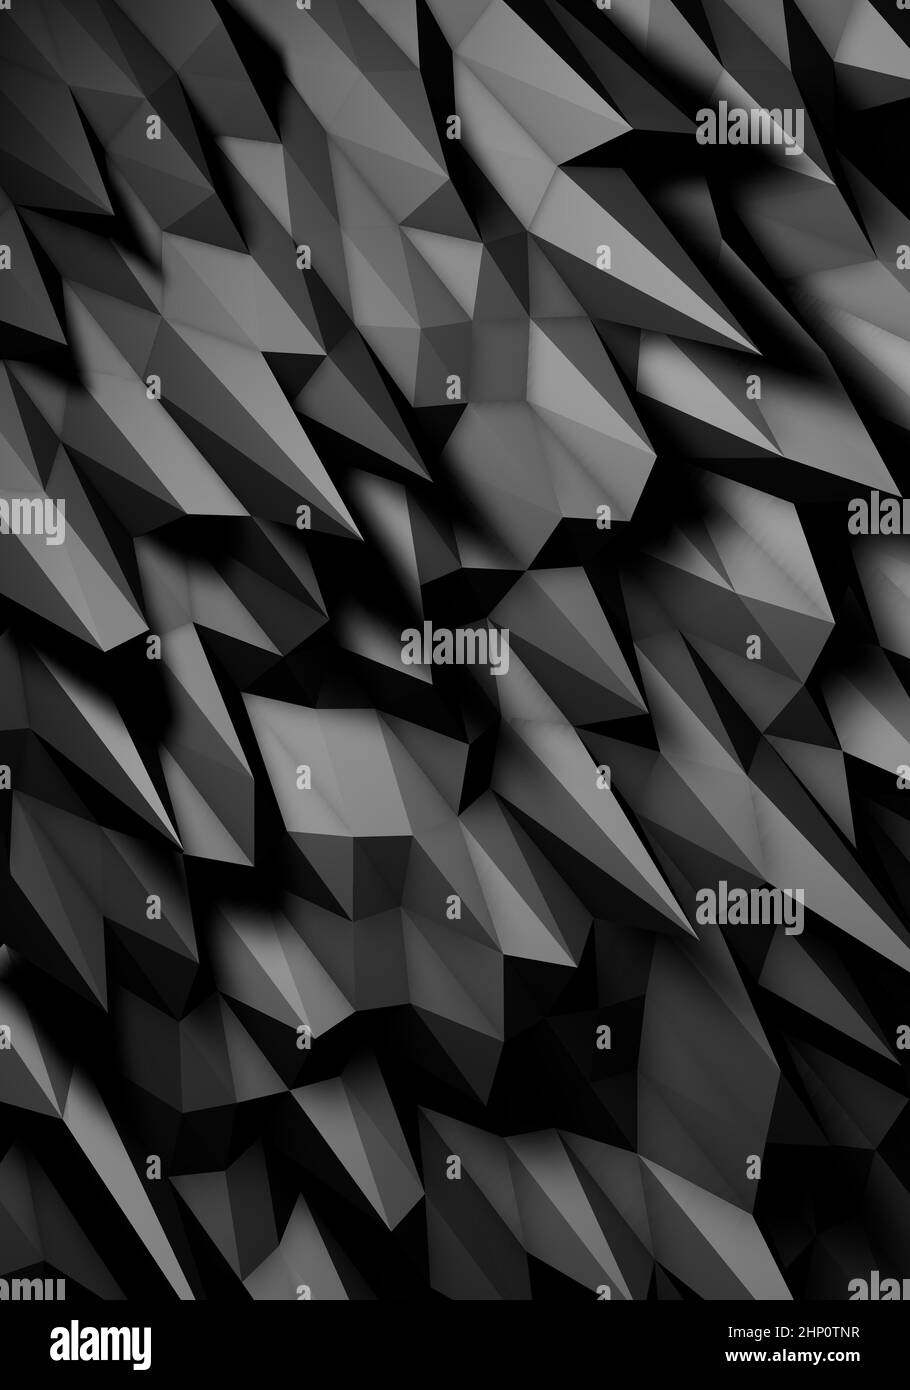 Black silk or satin fabric abstract background. Black abstract